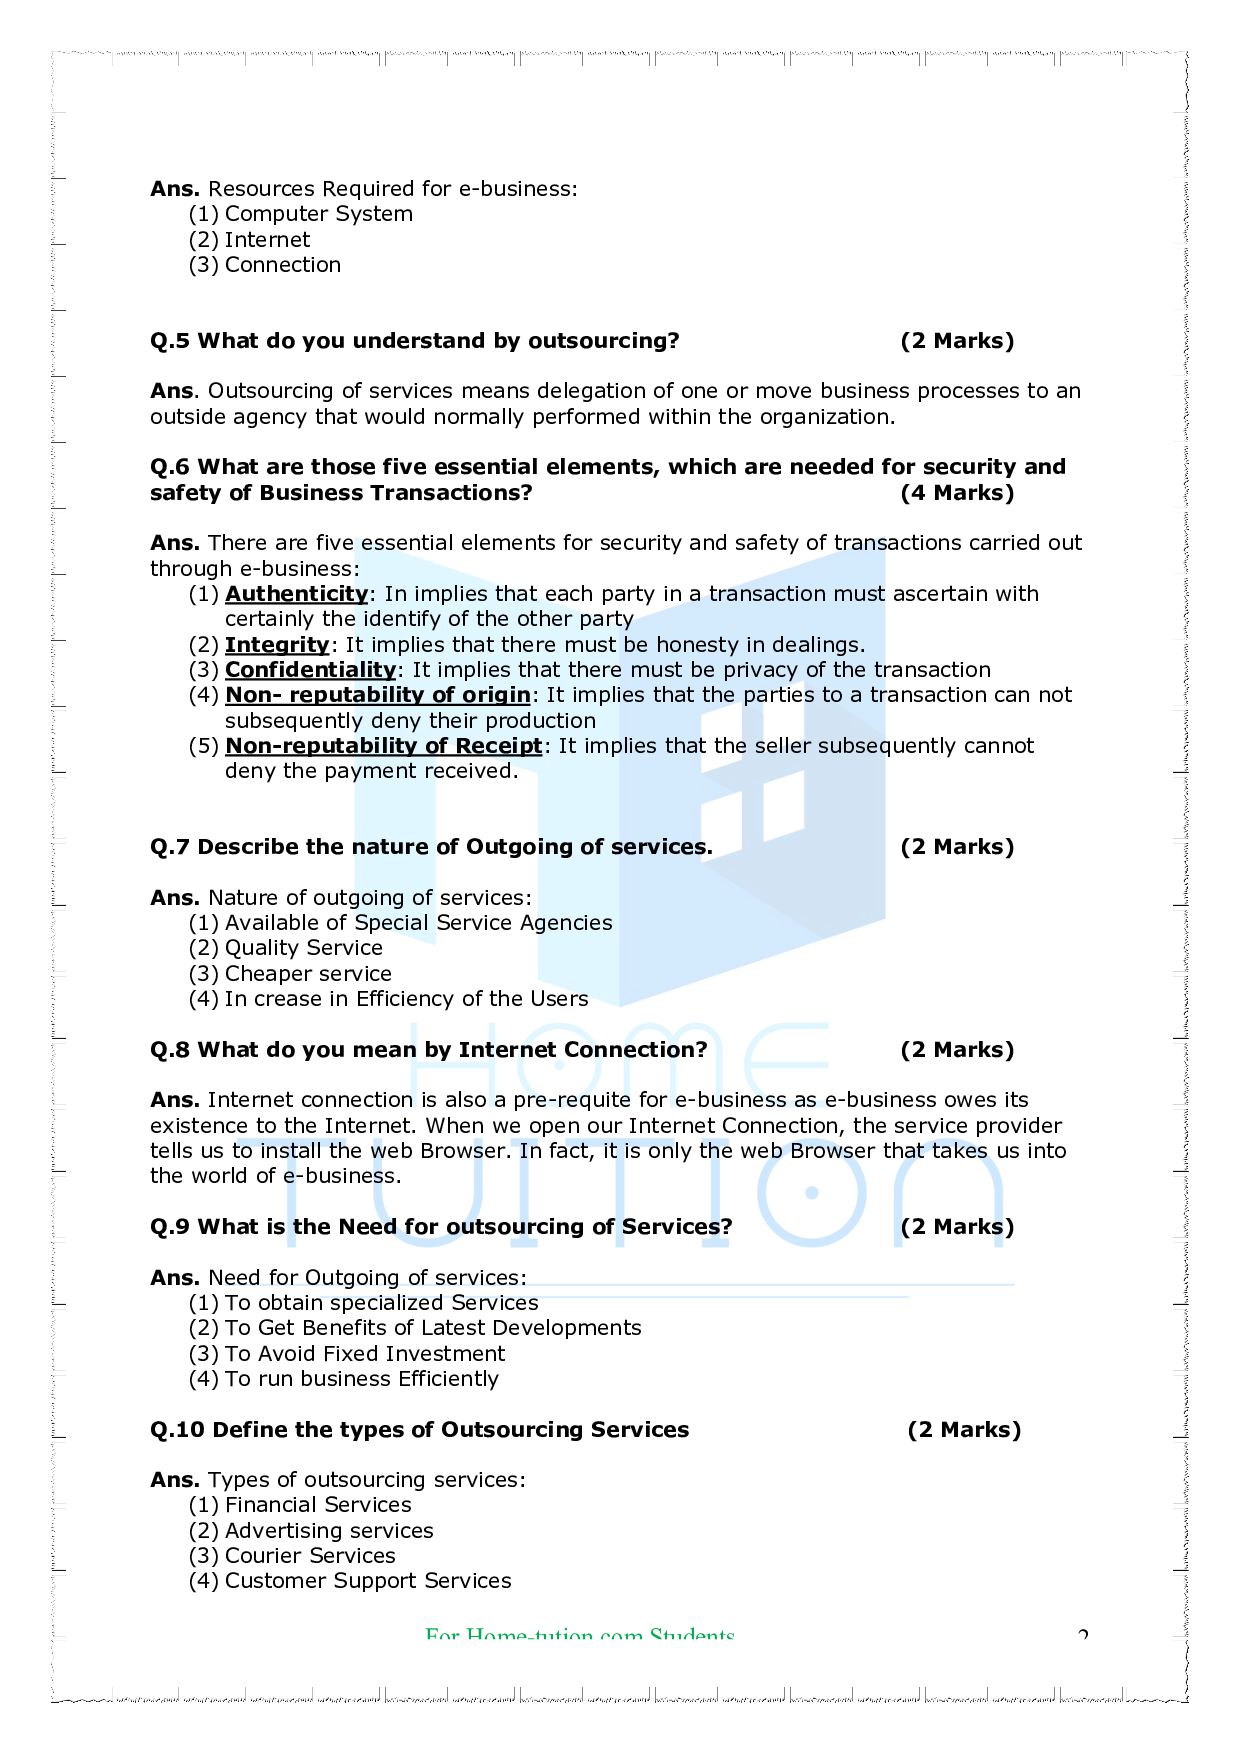 Chapter 5-Emerging Modes of Business Questions